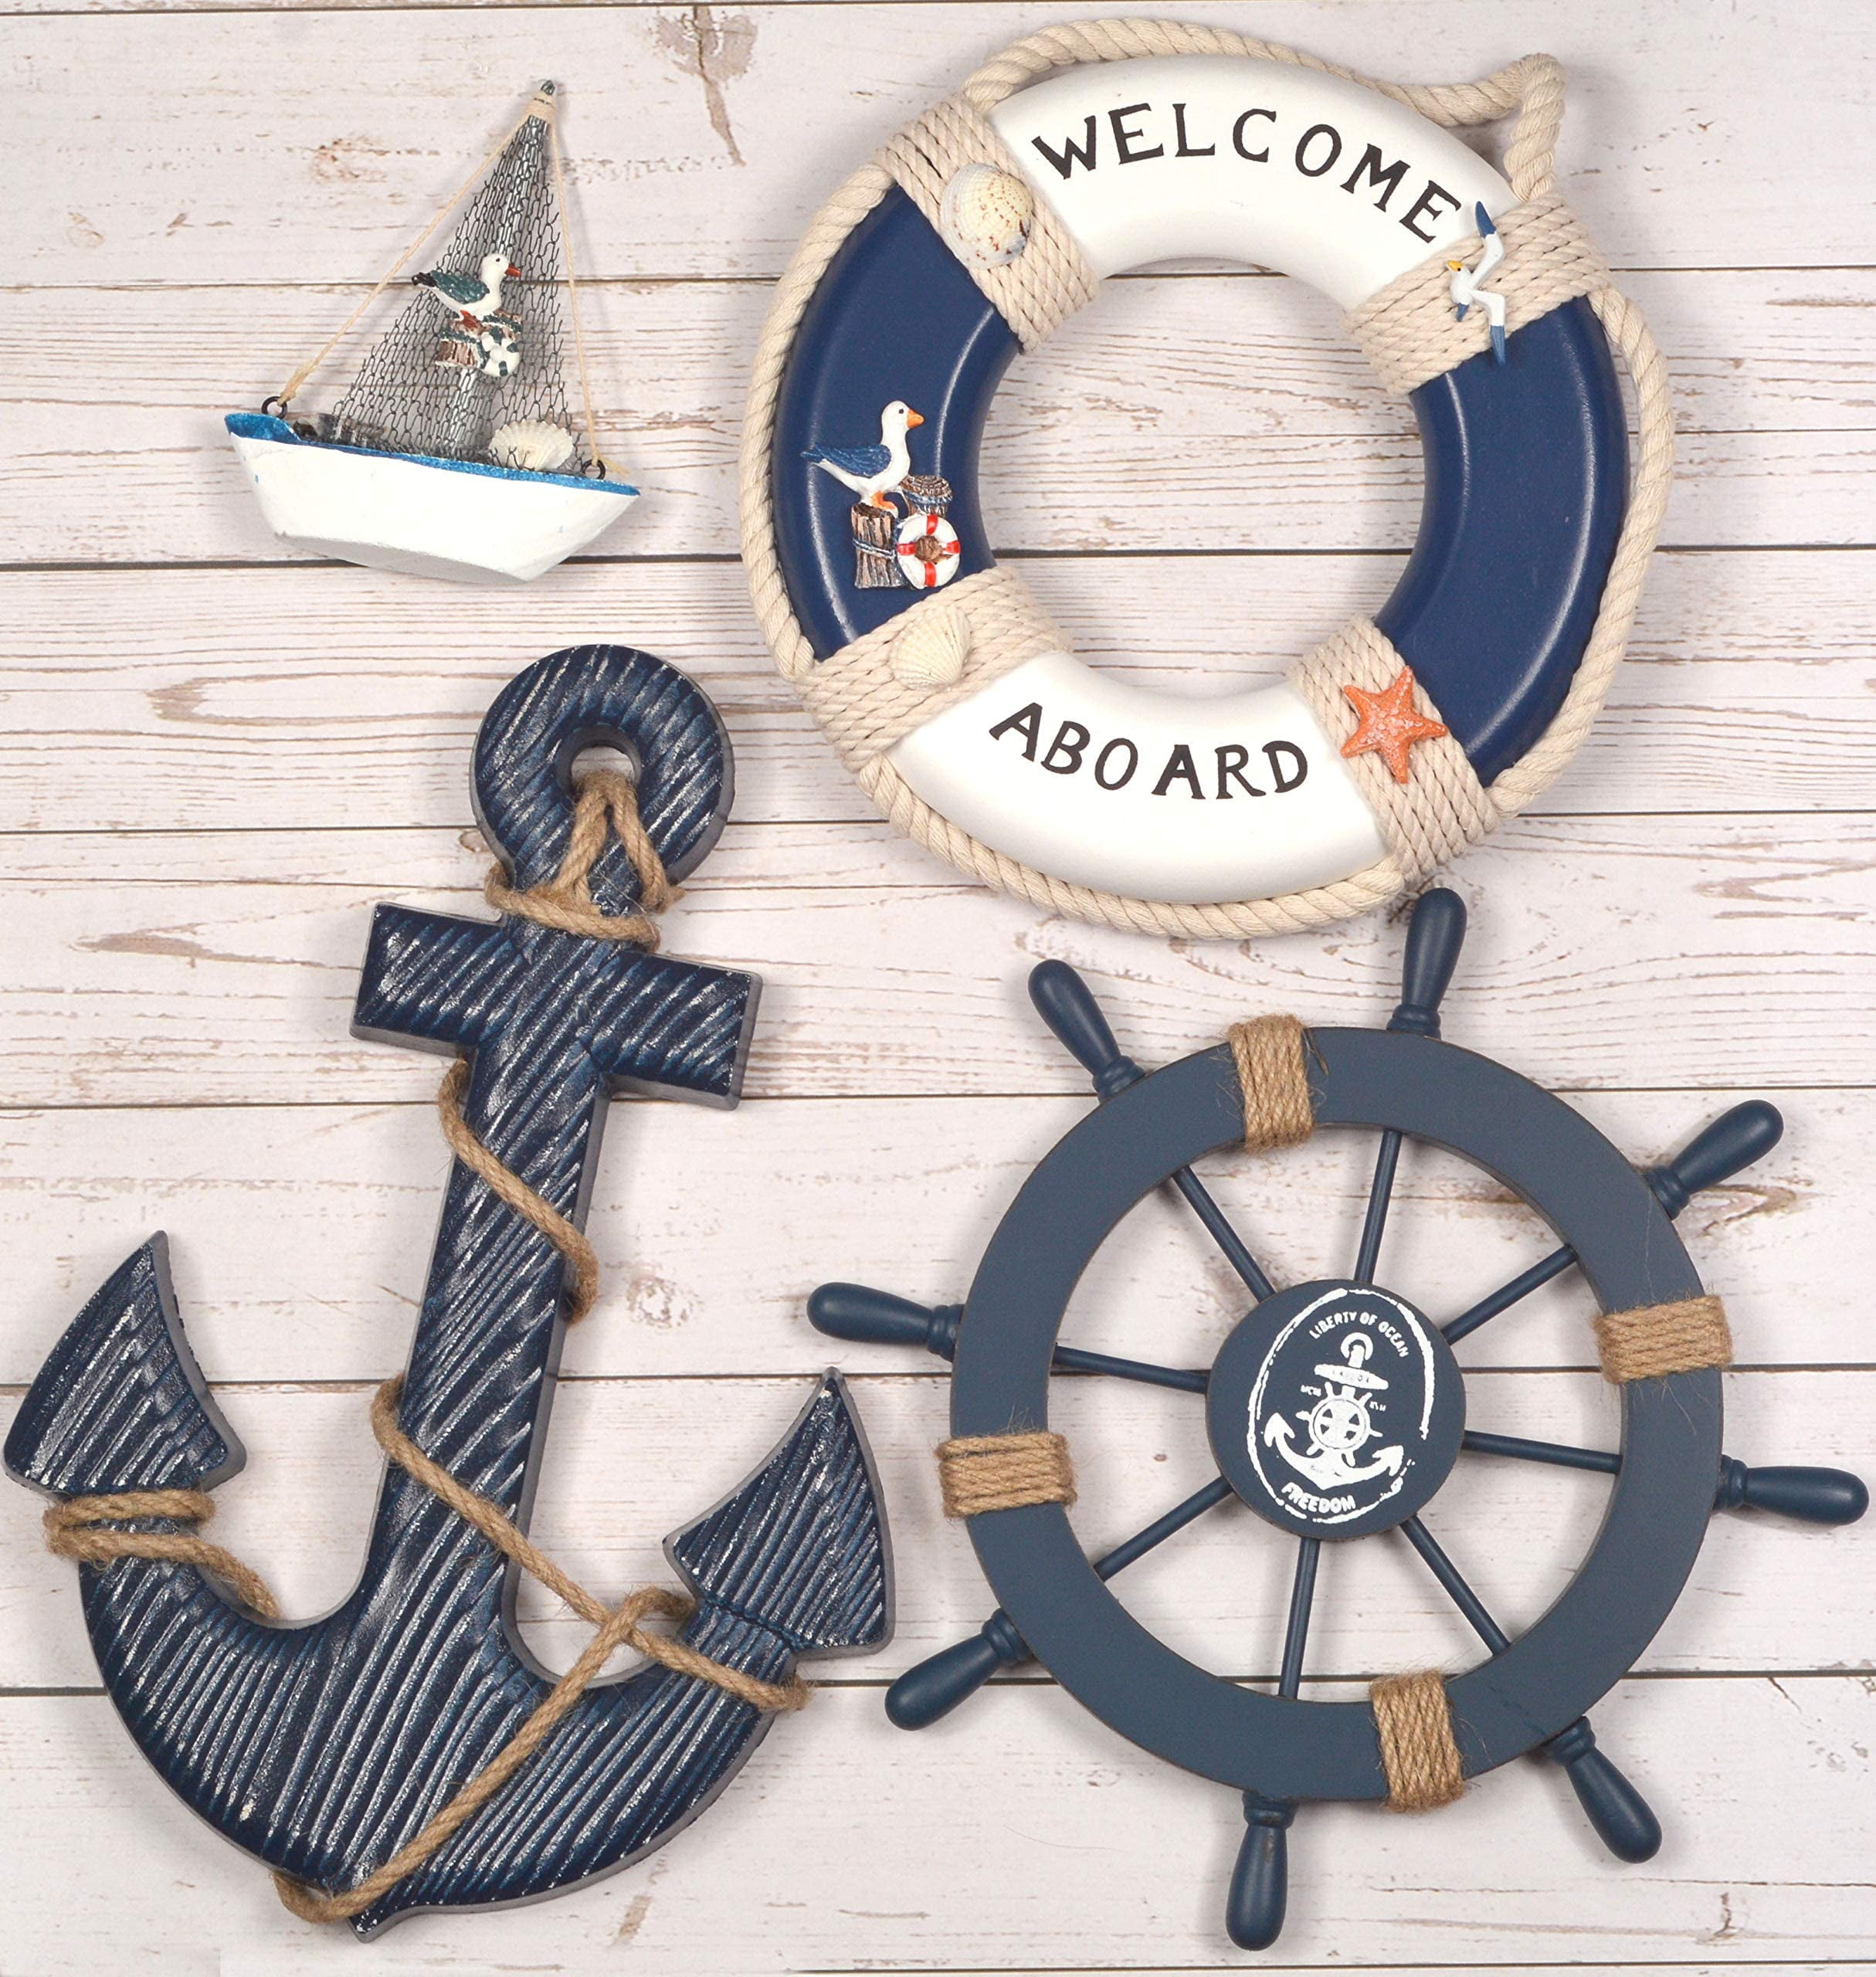 Nautical decor φ32cm wood Life Ring Beach Home Pub Store WELCOME Sign Plaques